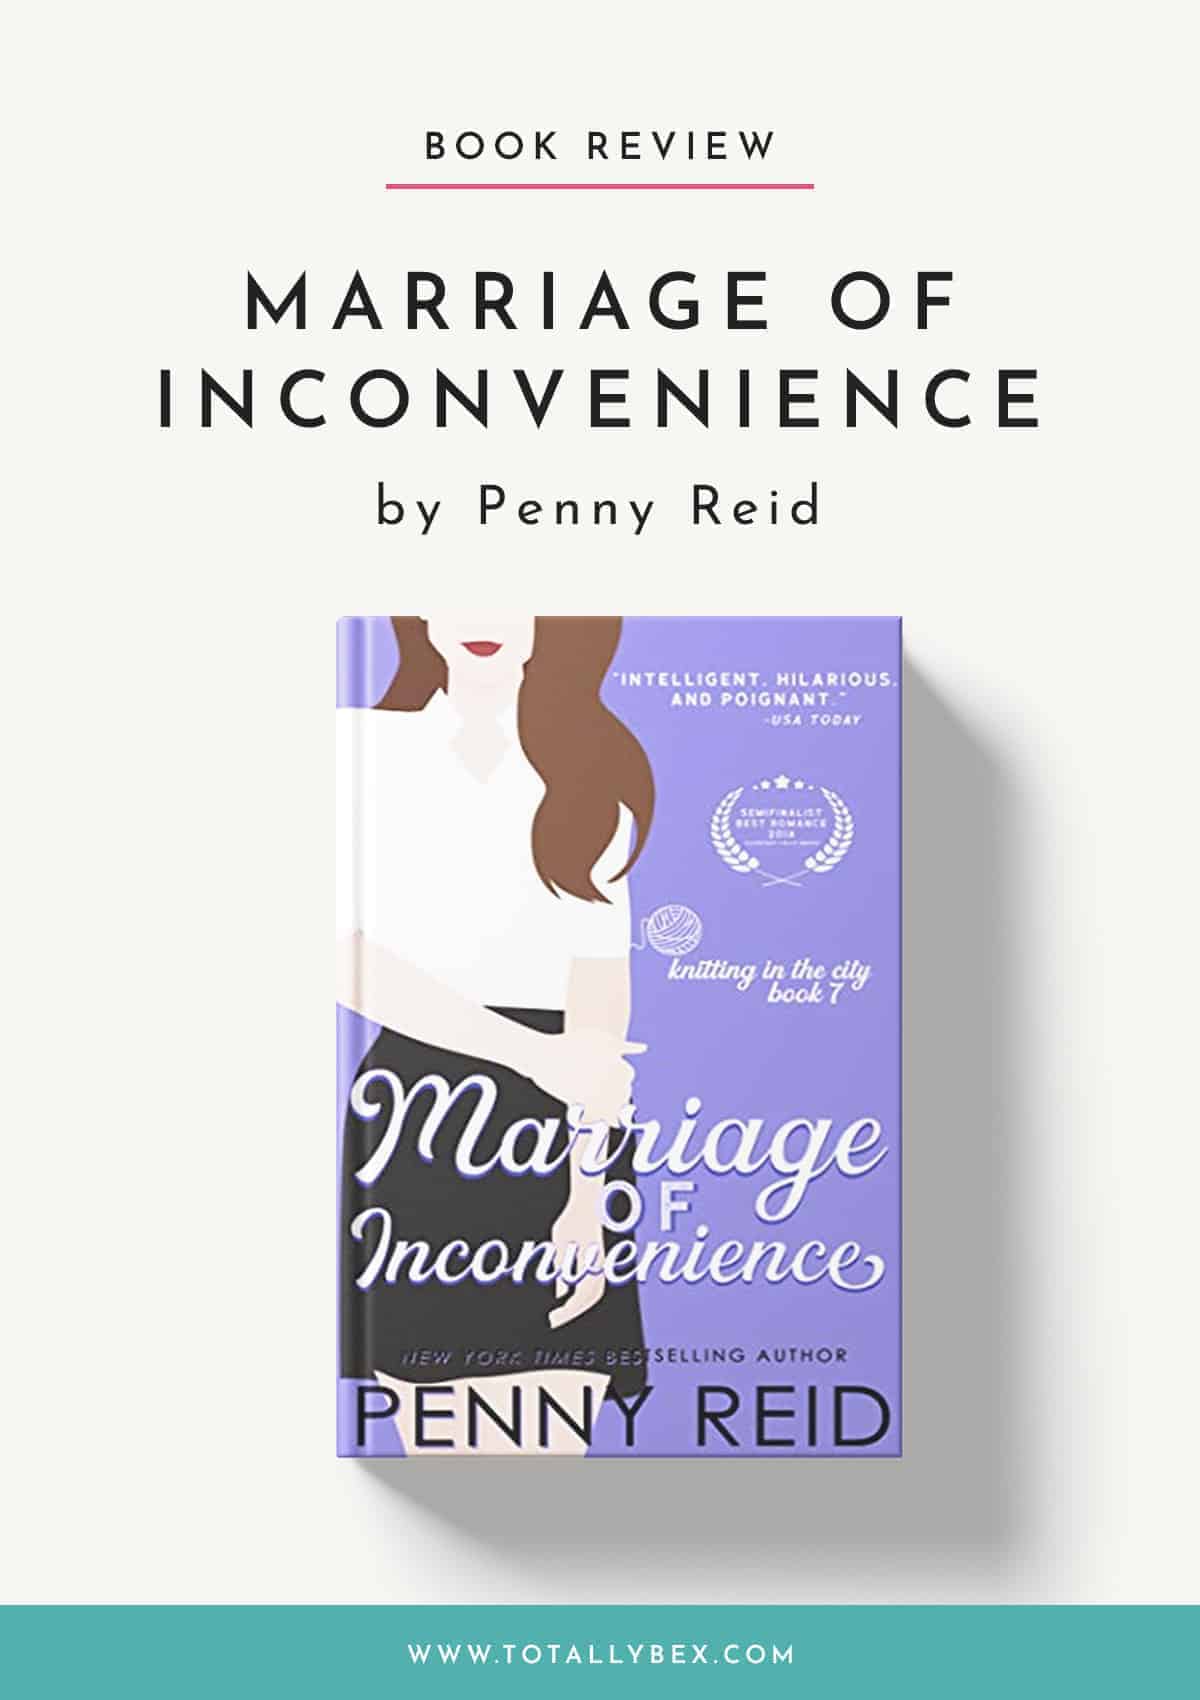 Marriage of Inconvenience by Penny Reid is the phenomenal and final book in the Knitting in the City series featuring foul-mouthed Dan, mild-mannered Kat, and their marriage of convenience